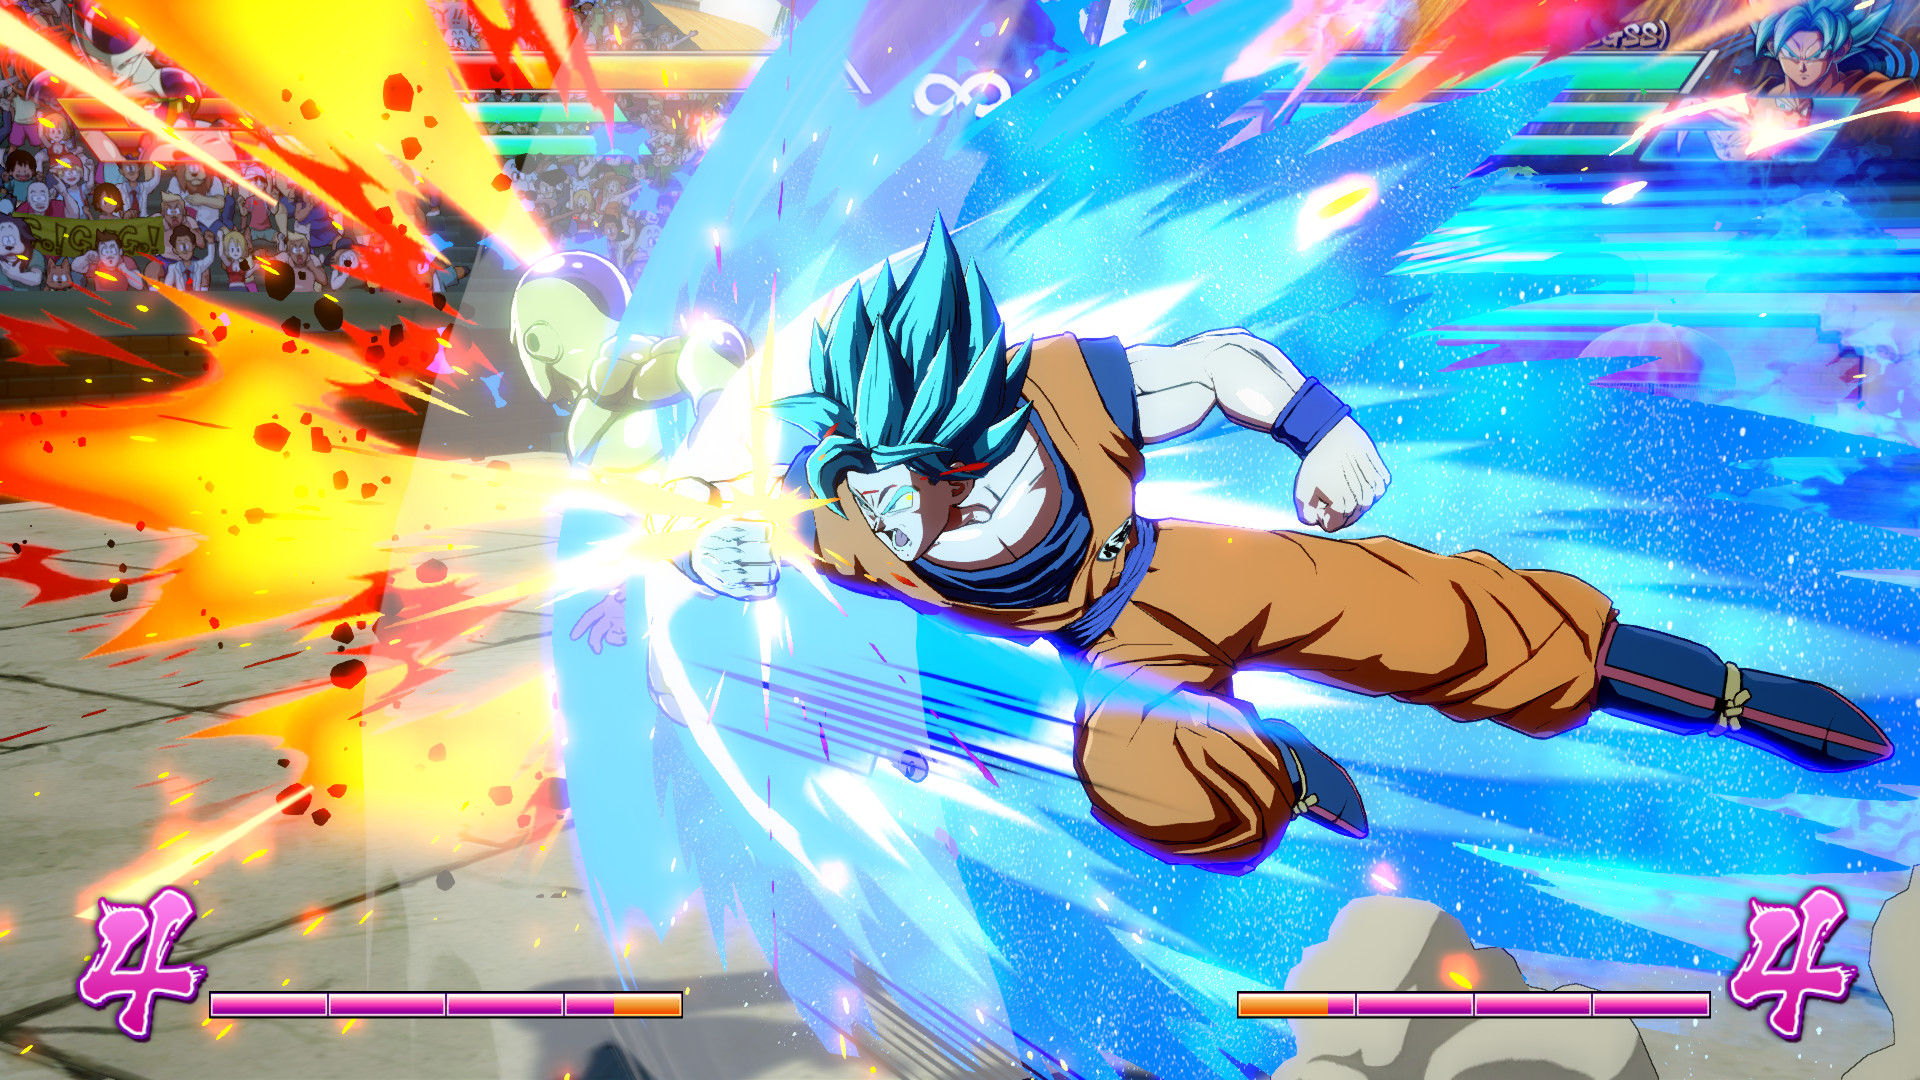 10 Best Dragon Ball Games of All Time Ranked by Sales